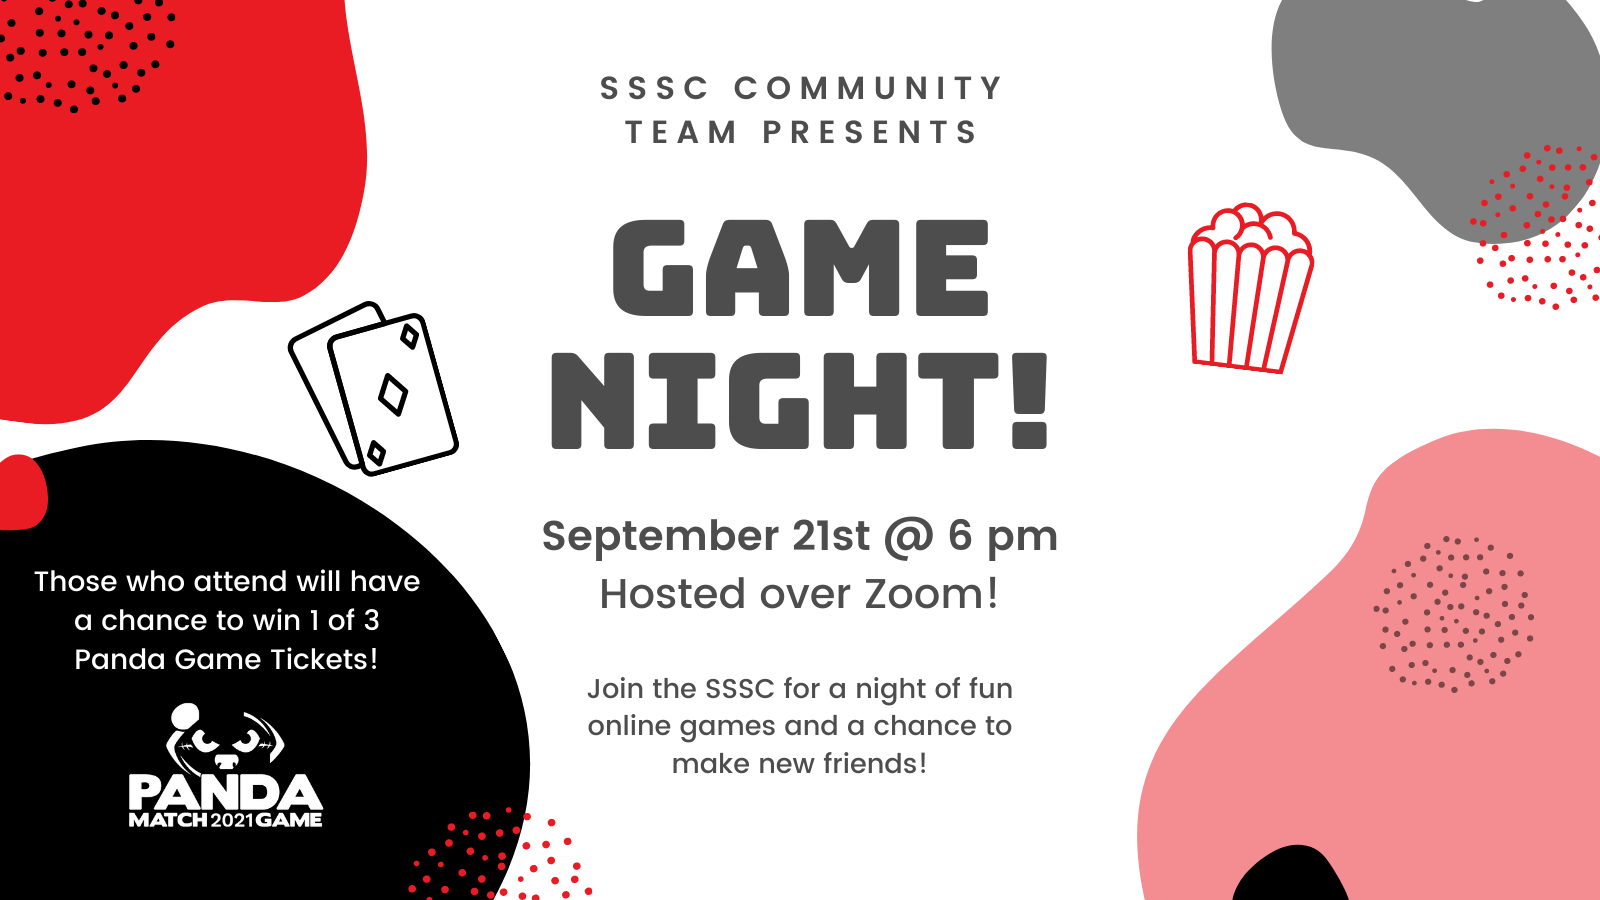 Poster for the SSSC event Game Night. Text from top to bottom reads “SSSC Community Team Presents Game Night. September 21st @ 6pm, Hosted over Zoom! Join the SSSC for a night of fun online games and a chance to make new friends! Those who attend will have a chance to win 1 of 3 Panda Game Tickets! Panda Match 2021 Game.” 